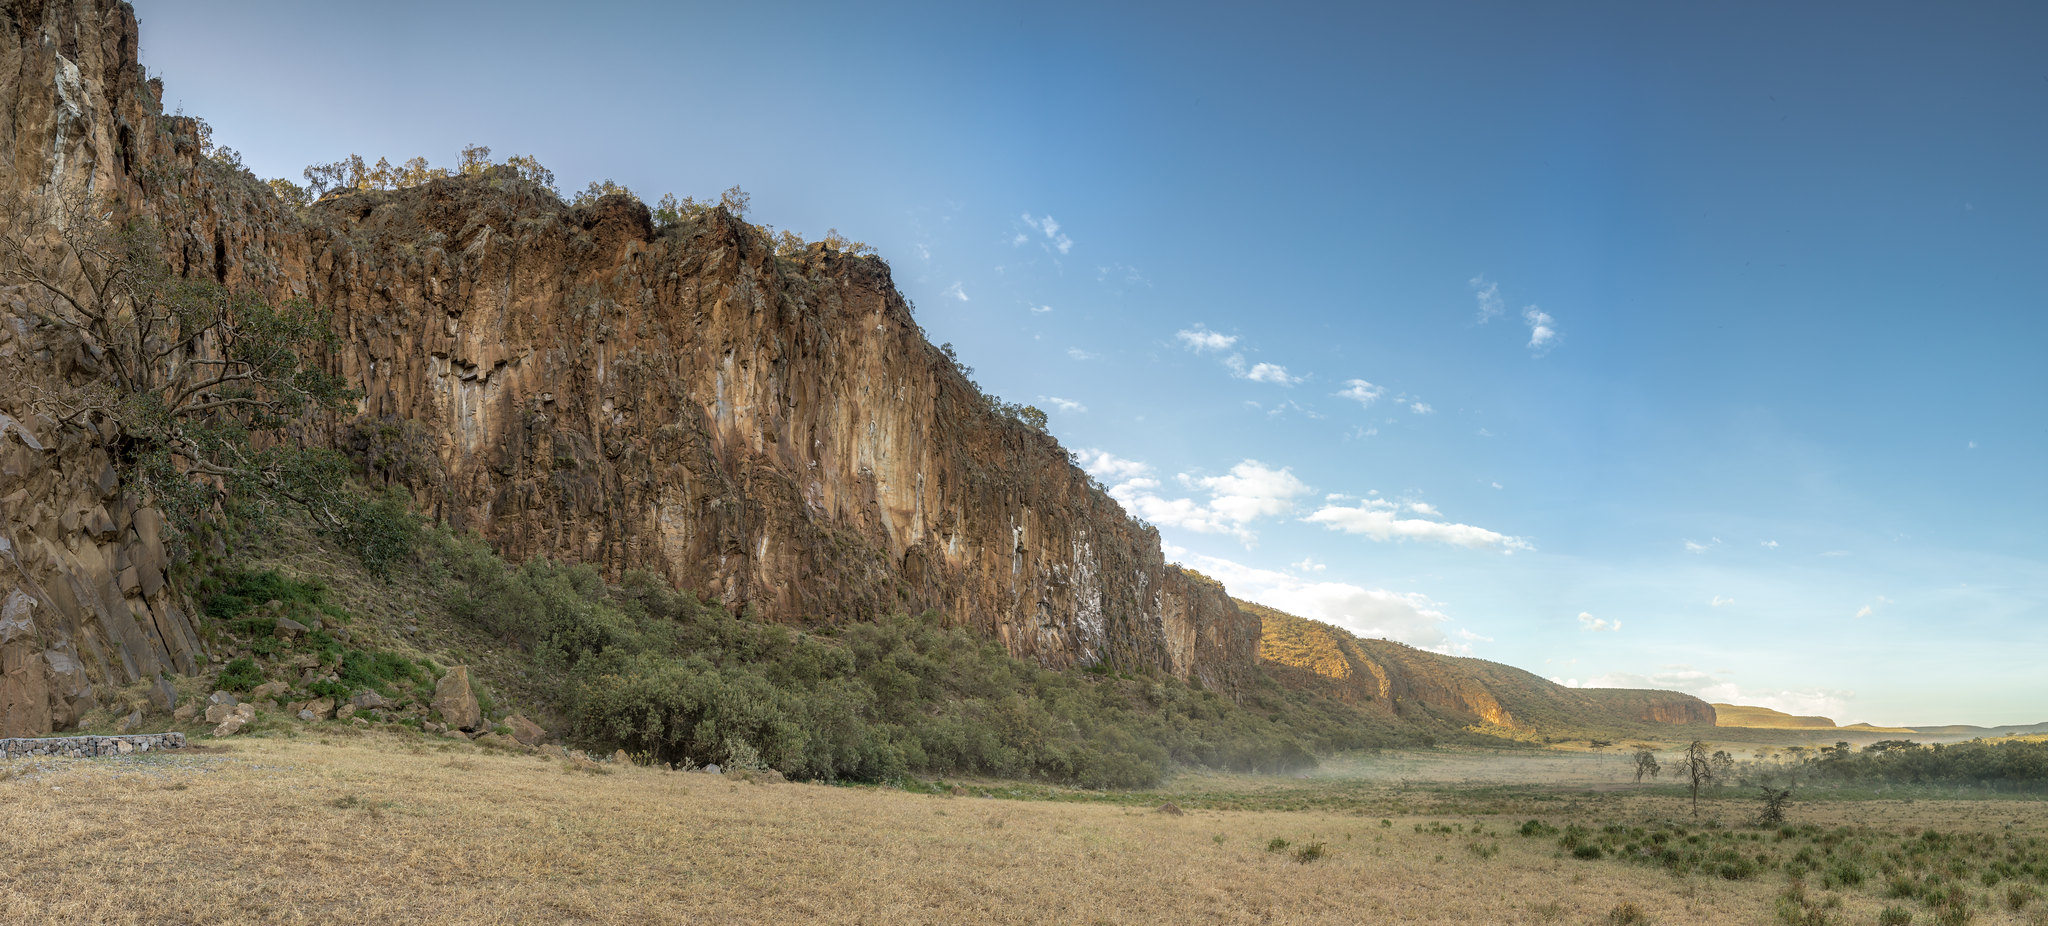 Hells Gate National Park Hikes